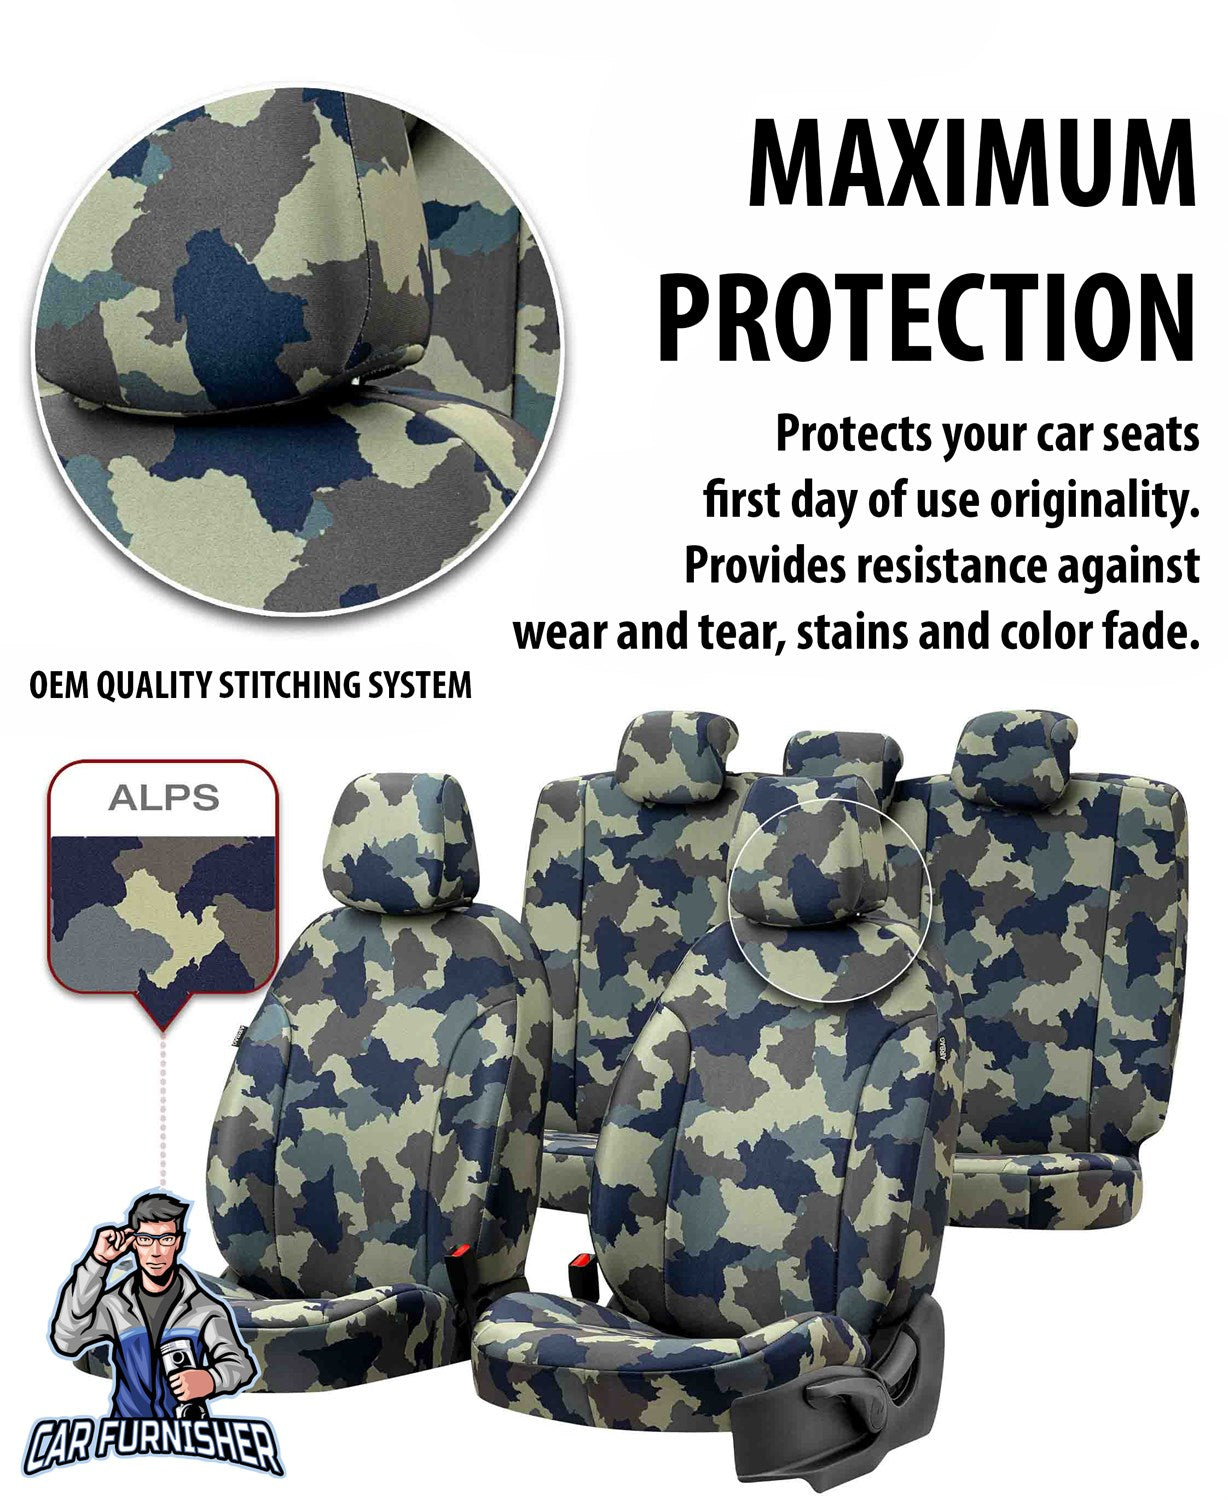 Fiat Ducato Seat Covers Camouflage Waterproof Design Montblanc Camo Waterproof Fabric